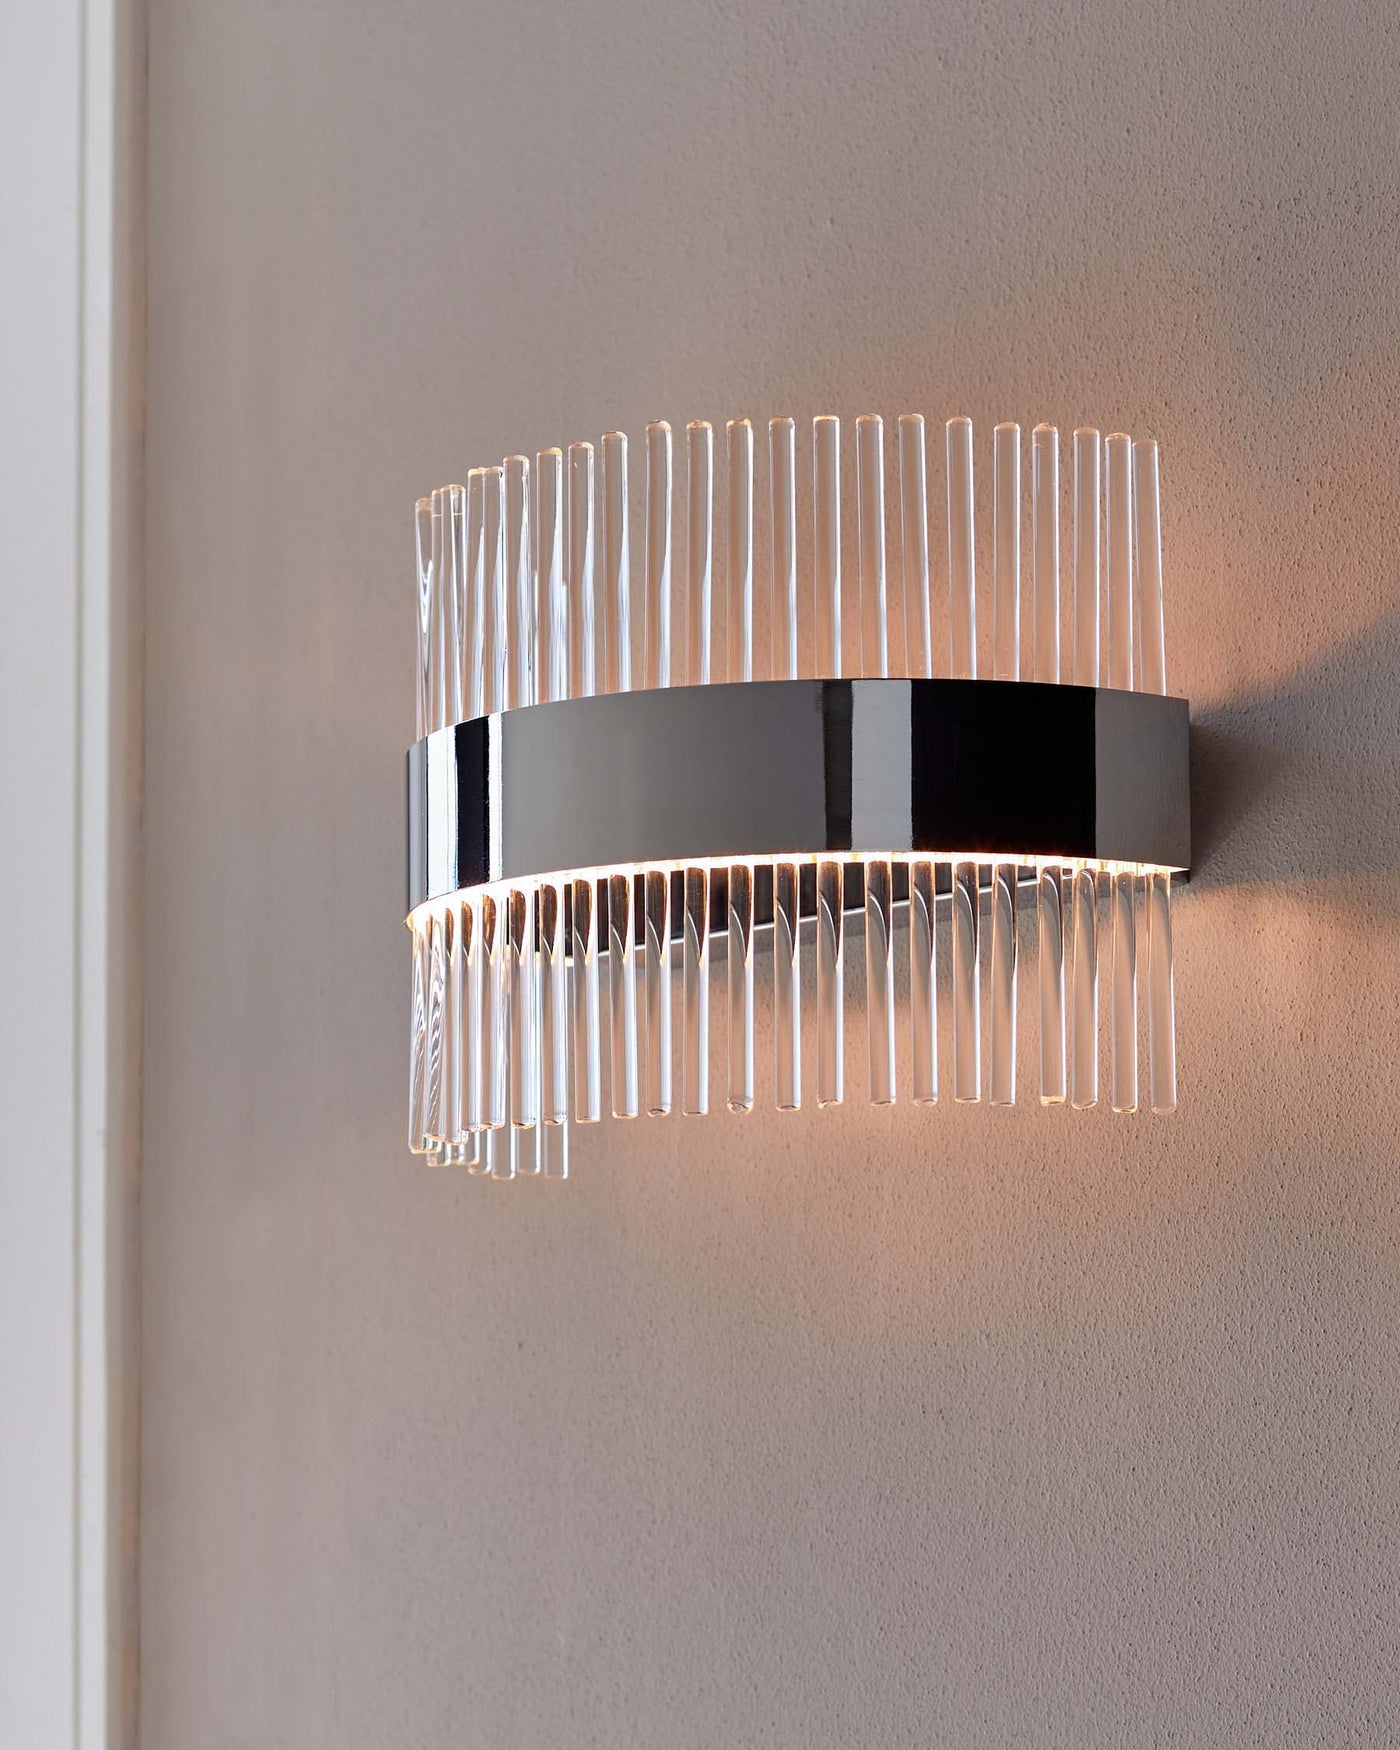 Contemporary wall-mounted light fixture with a cylindrical chrome base and vertical clear glass rods creating a radiant lighting effect on a neutral wall.